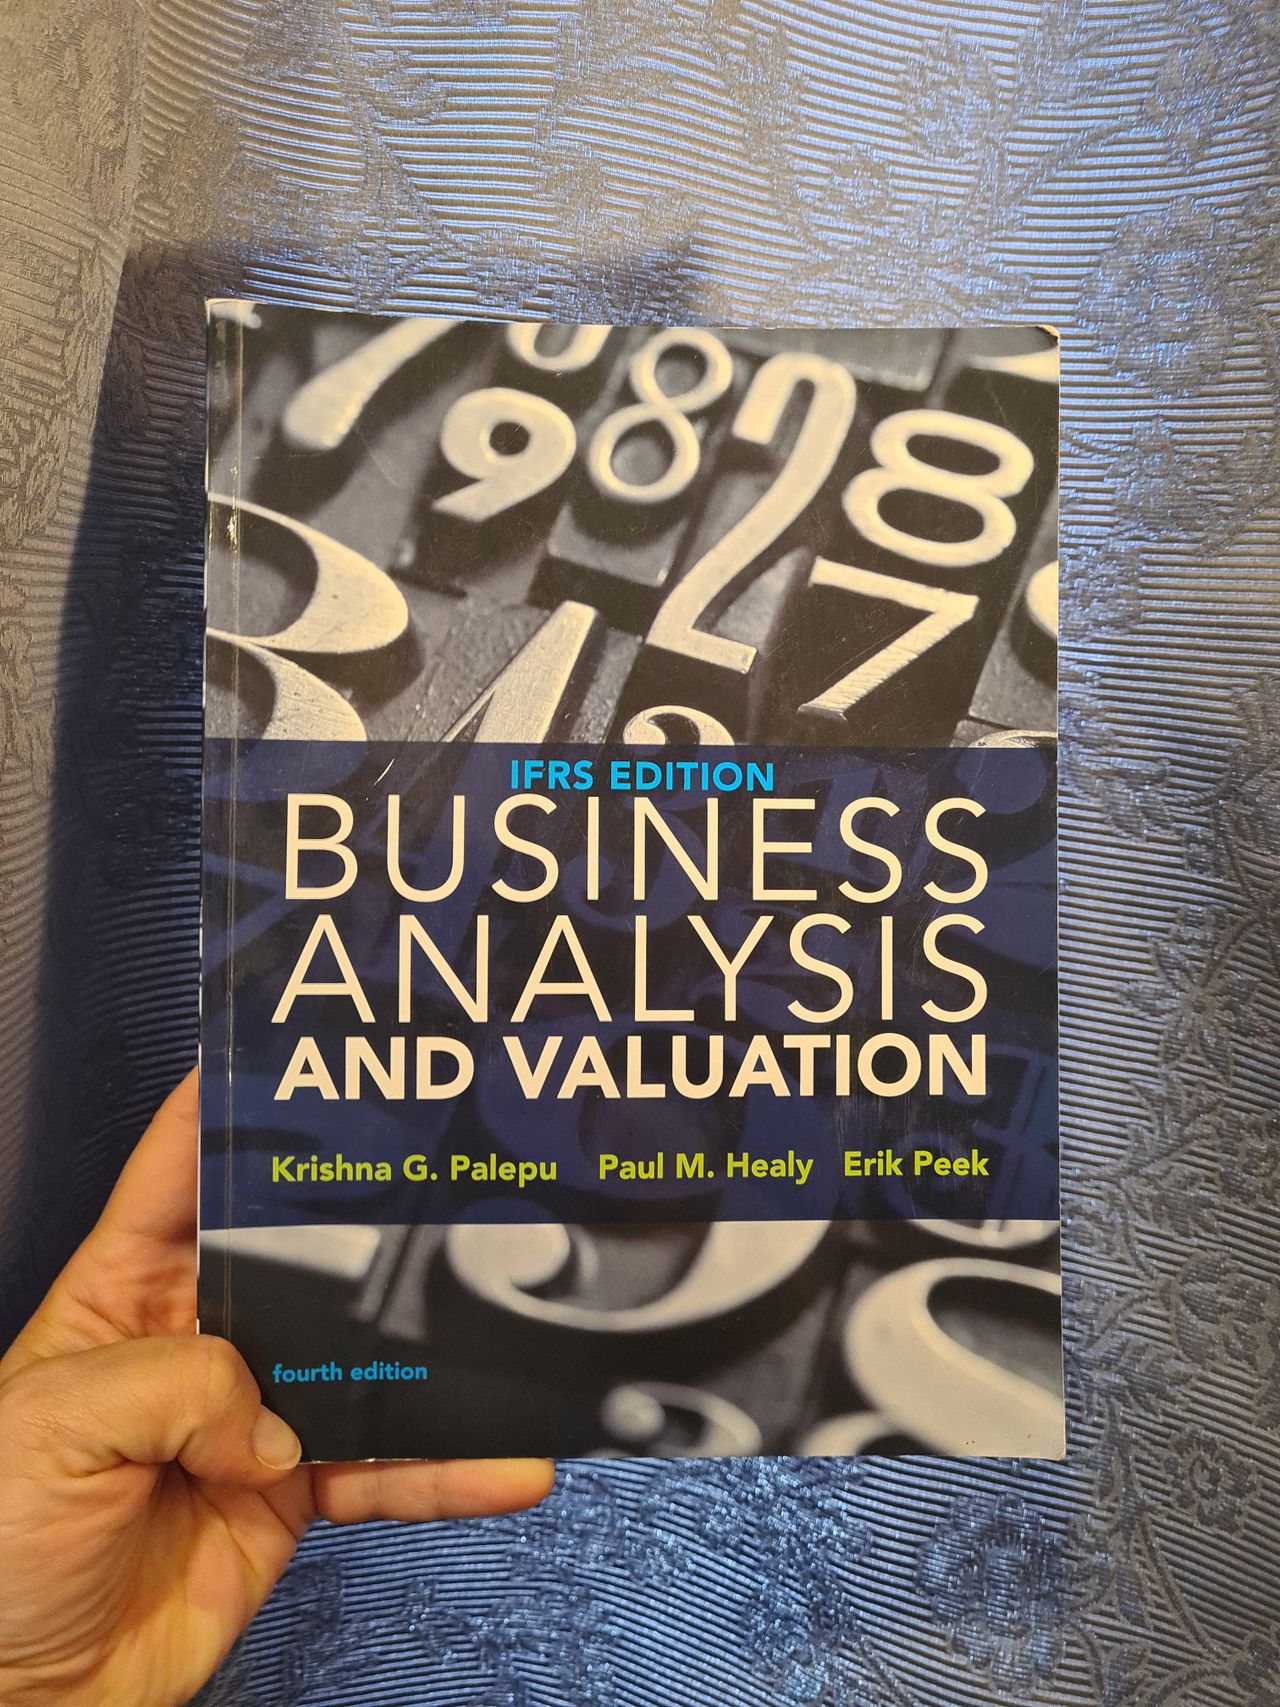 Business Analysis and Valuation: IFRS Edition. Fourth